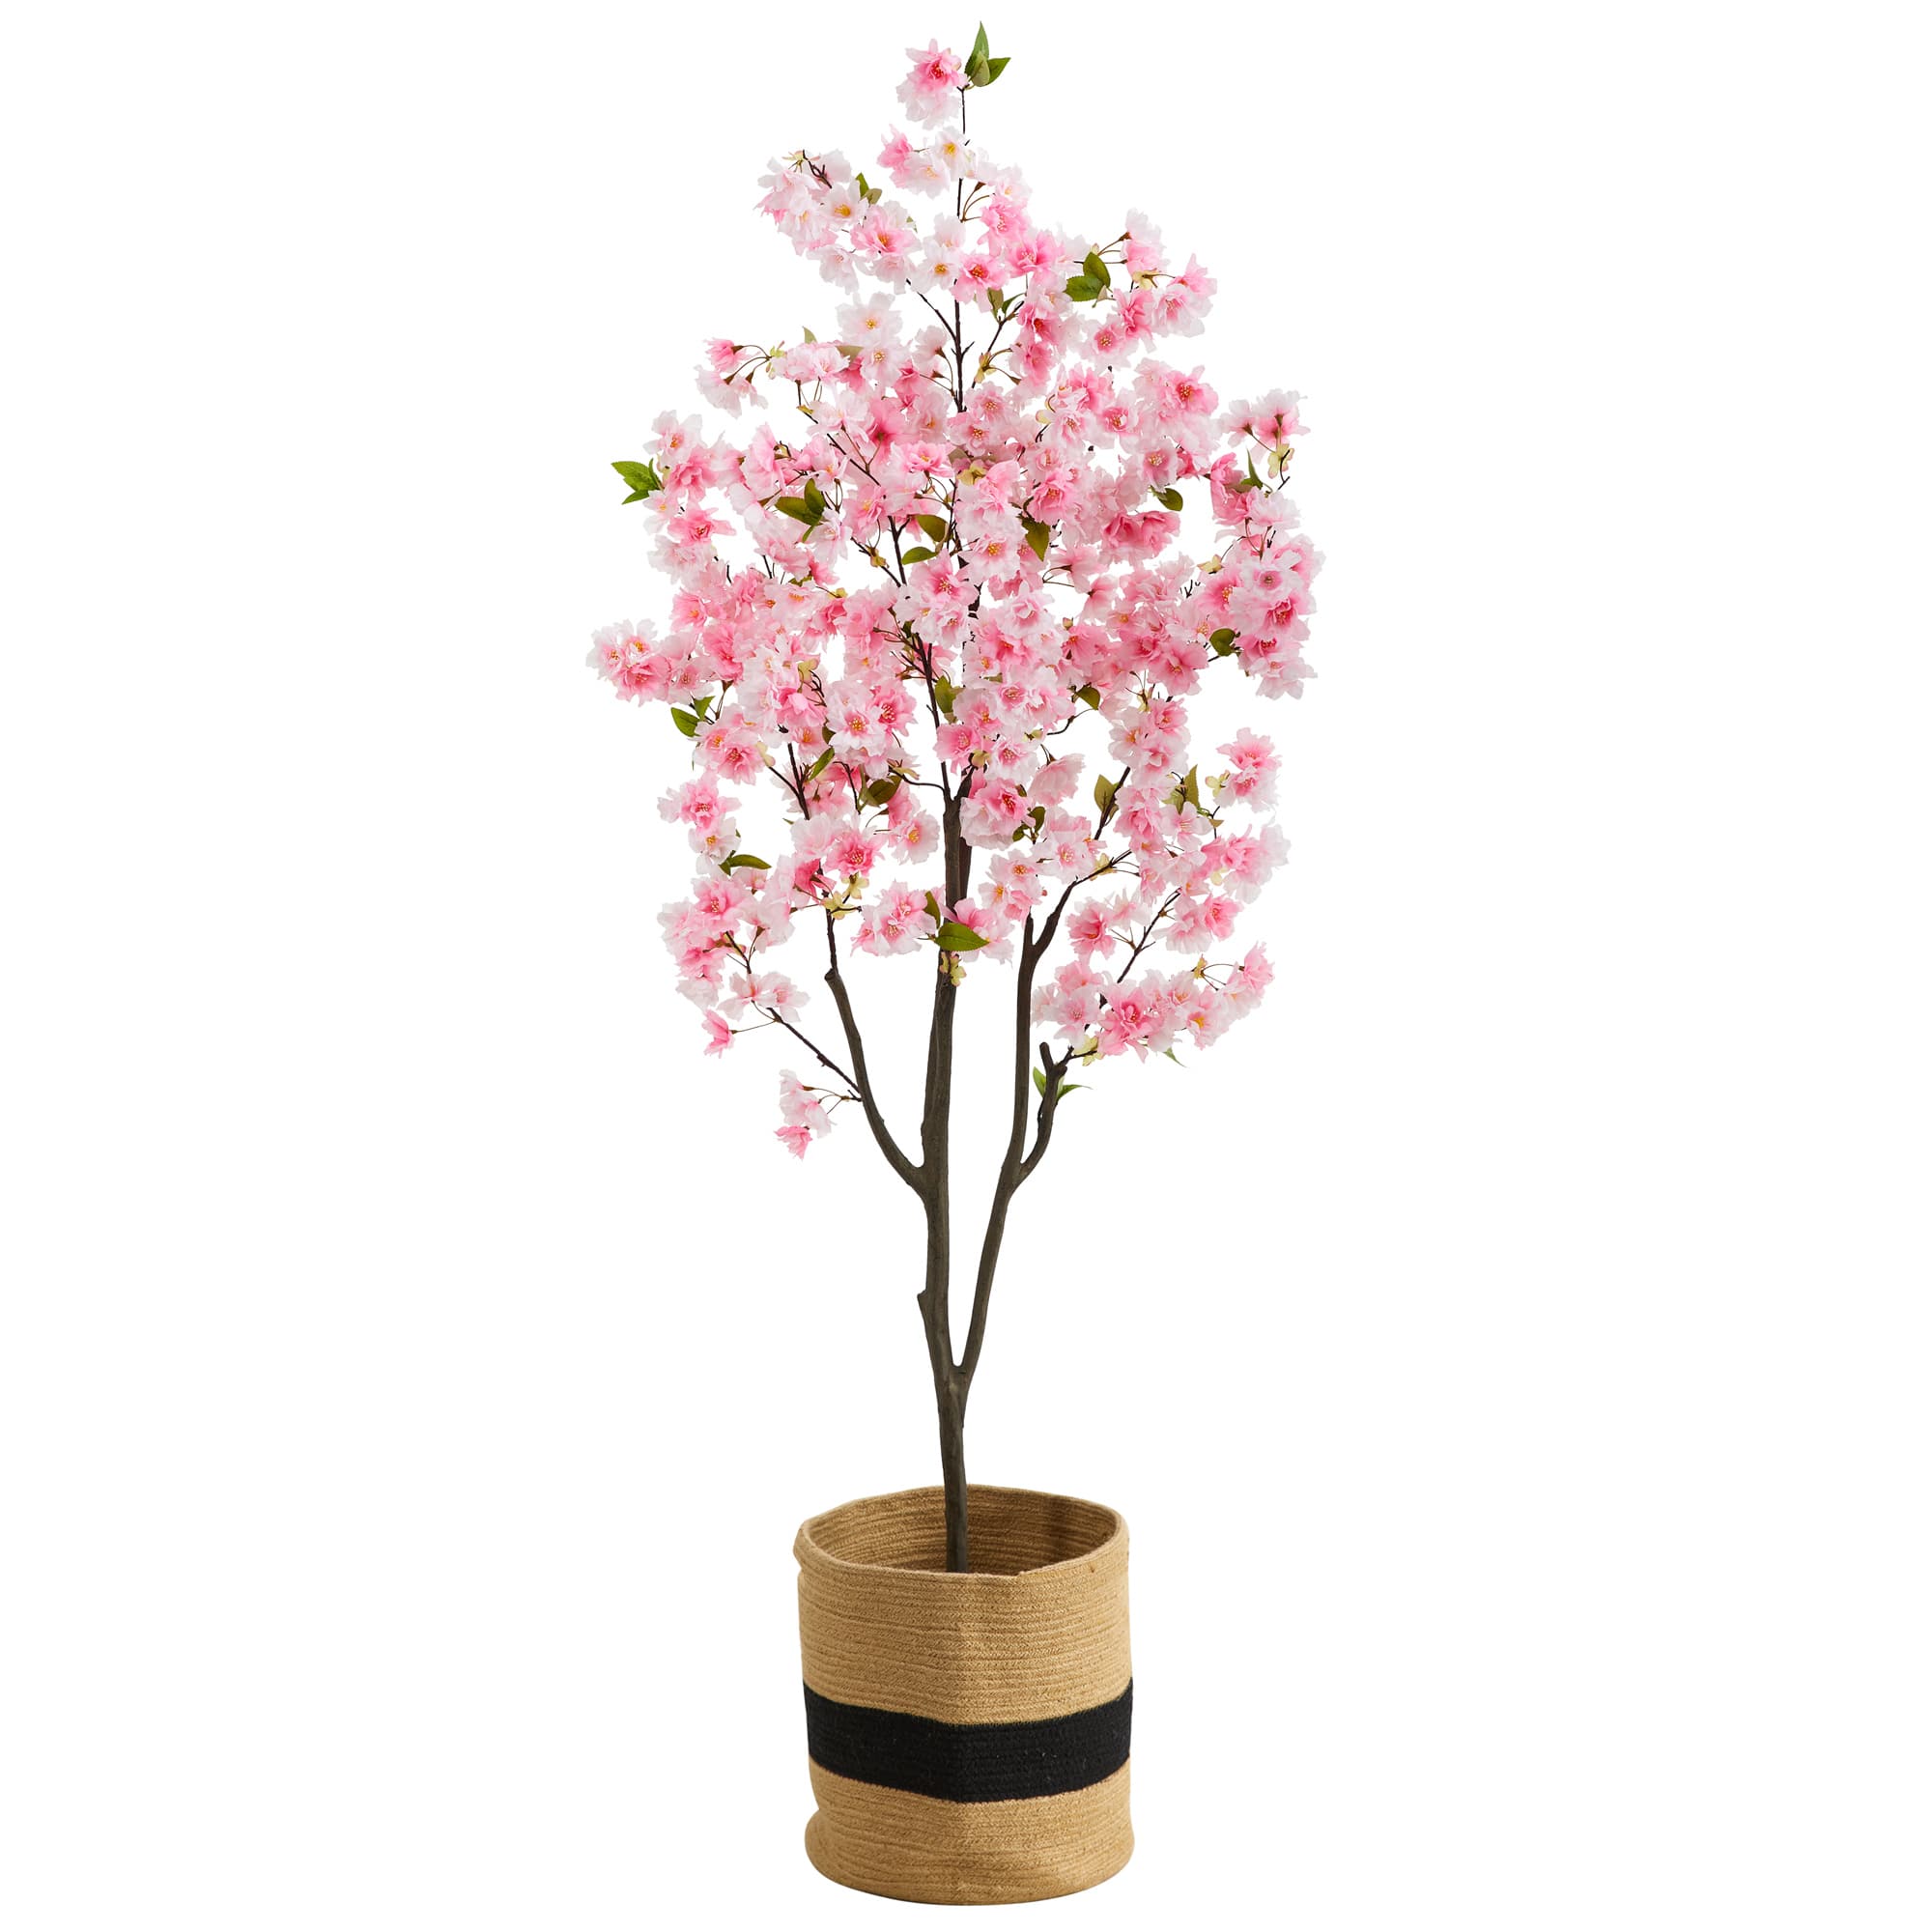 6ft. Artificial Cherry Blossom Tree with Basket